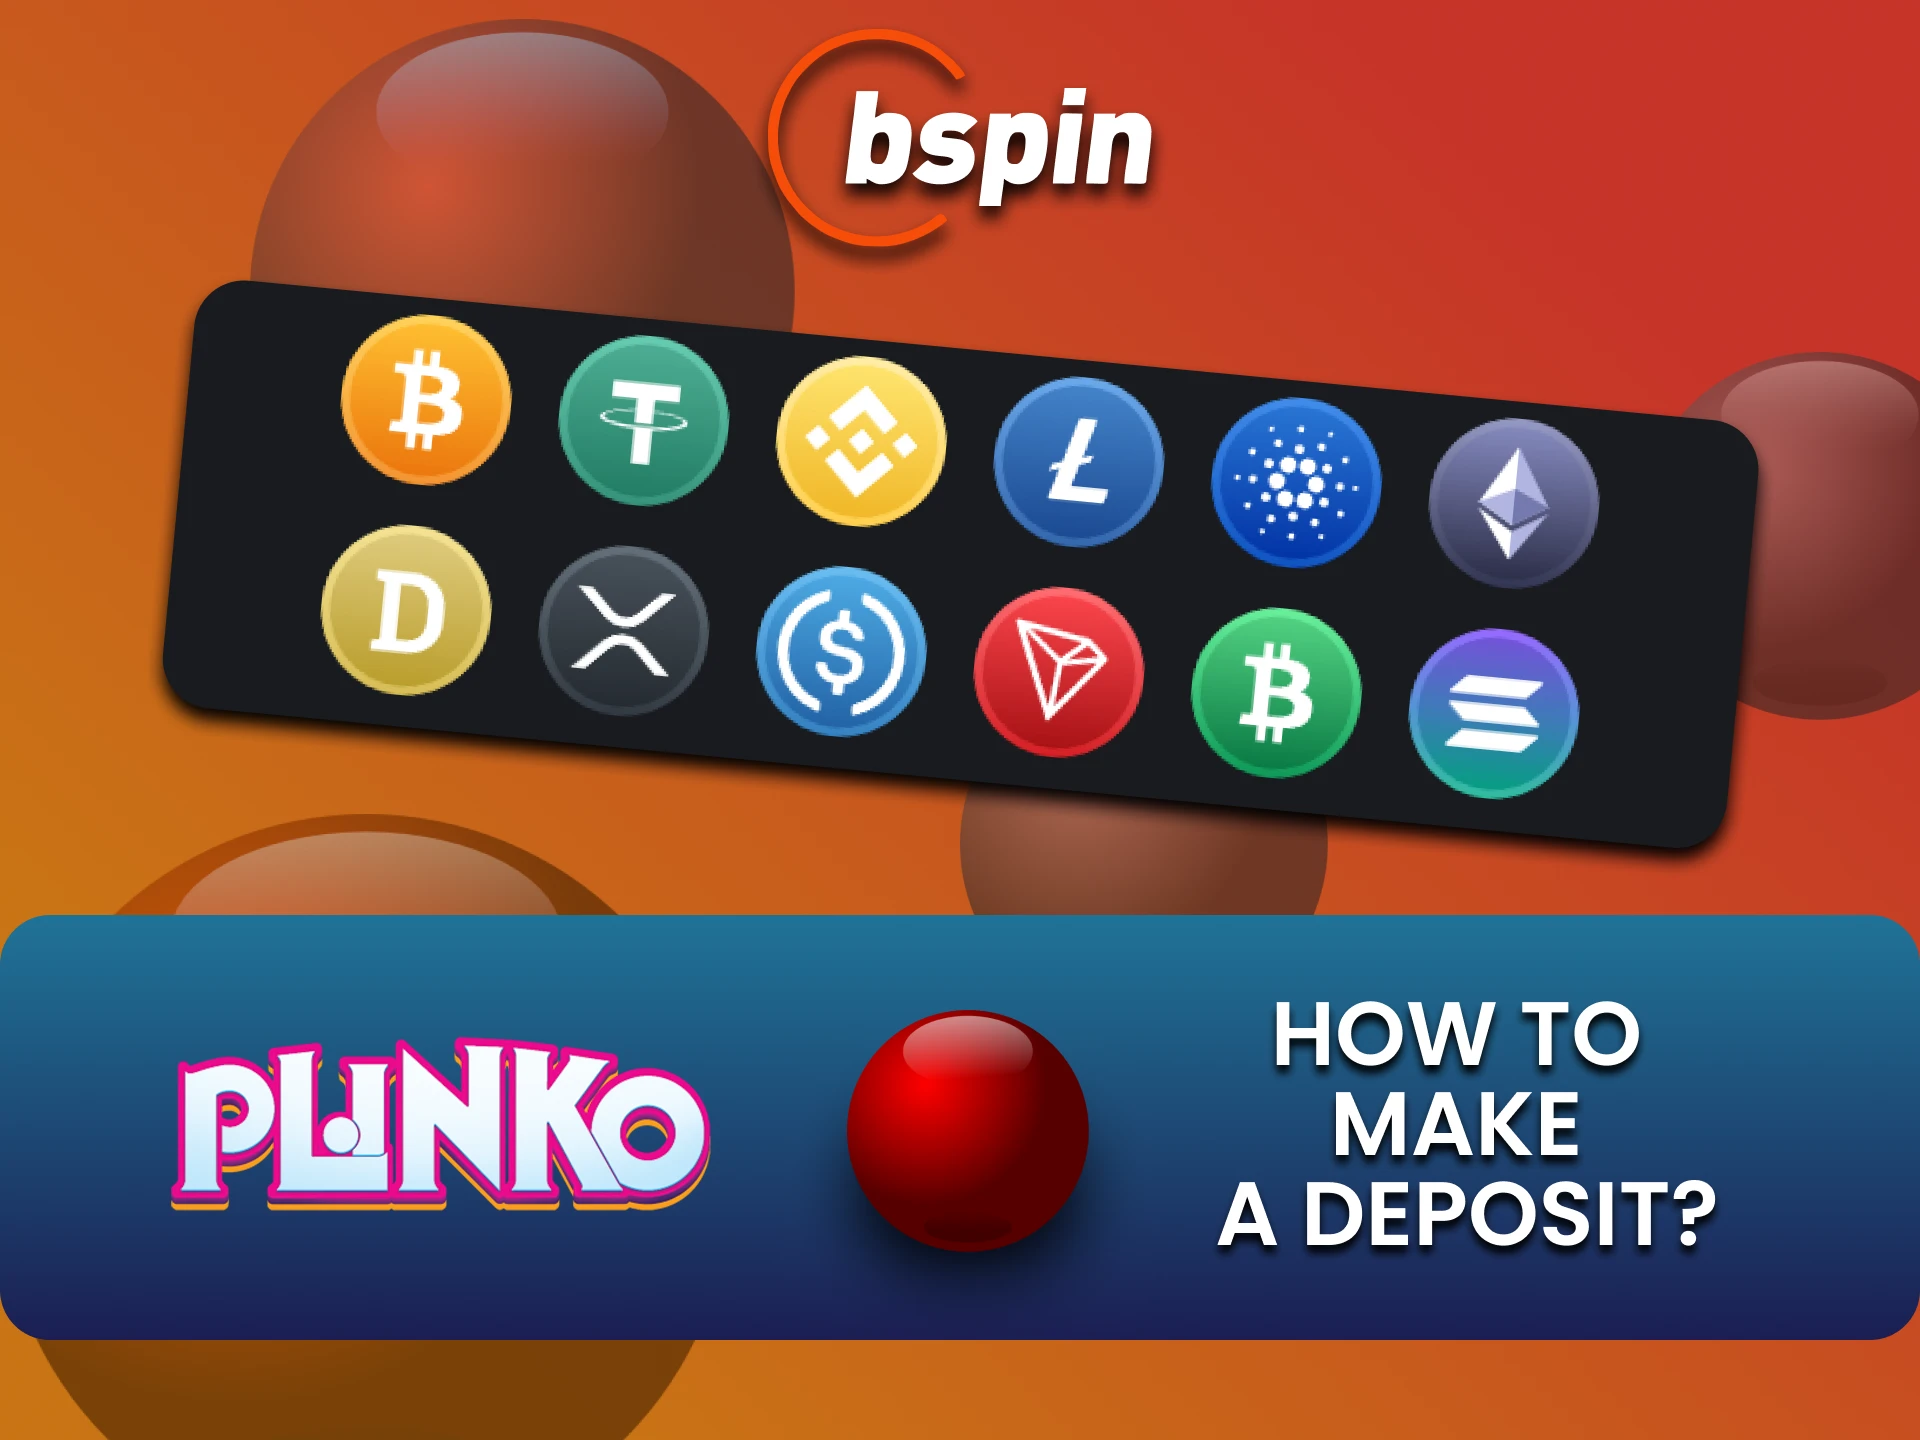 Choose your method of replenishing funds on Bspin for the game Plinko.